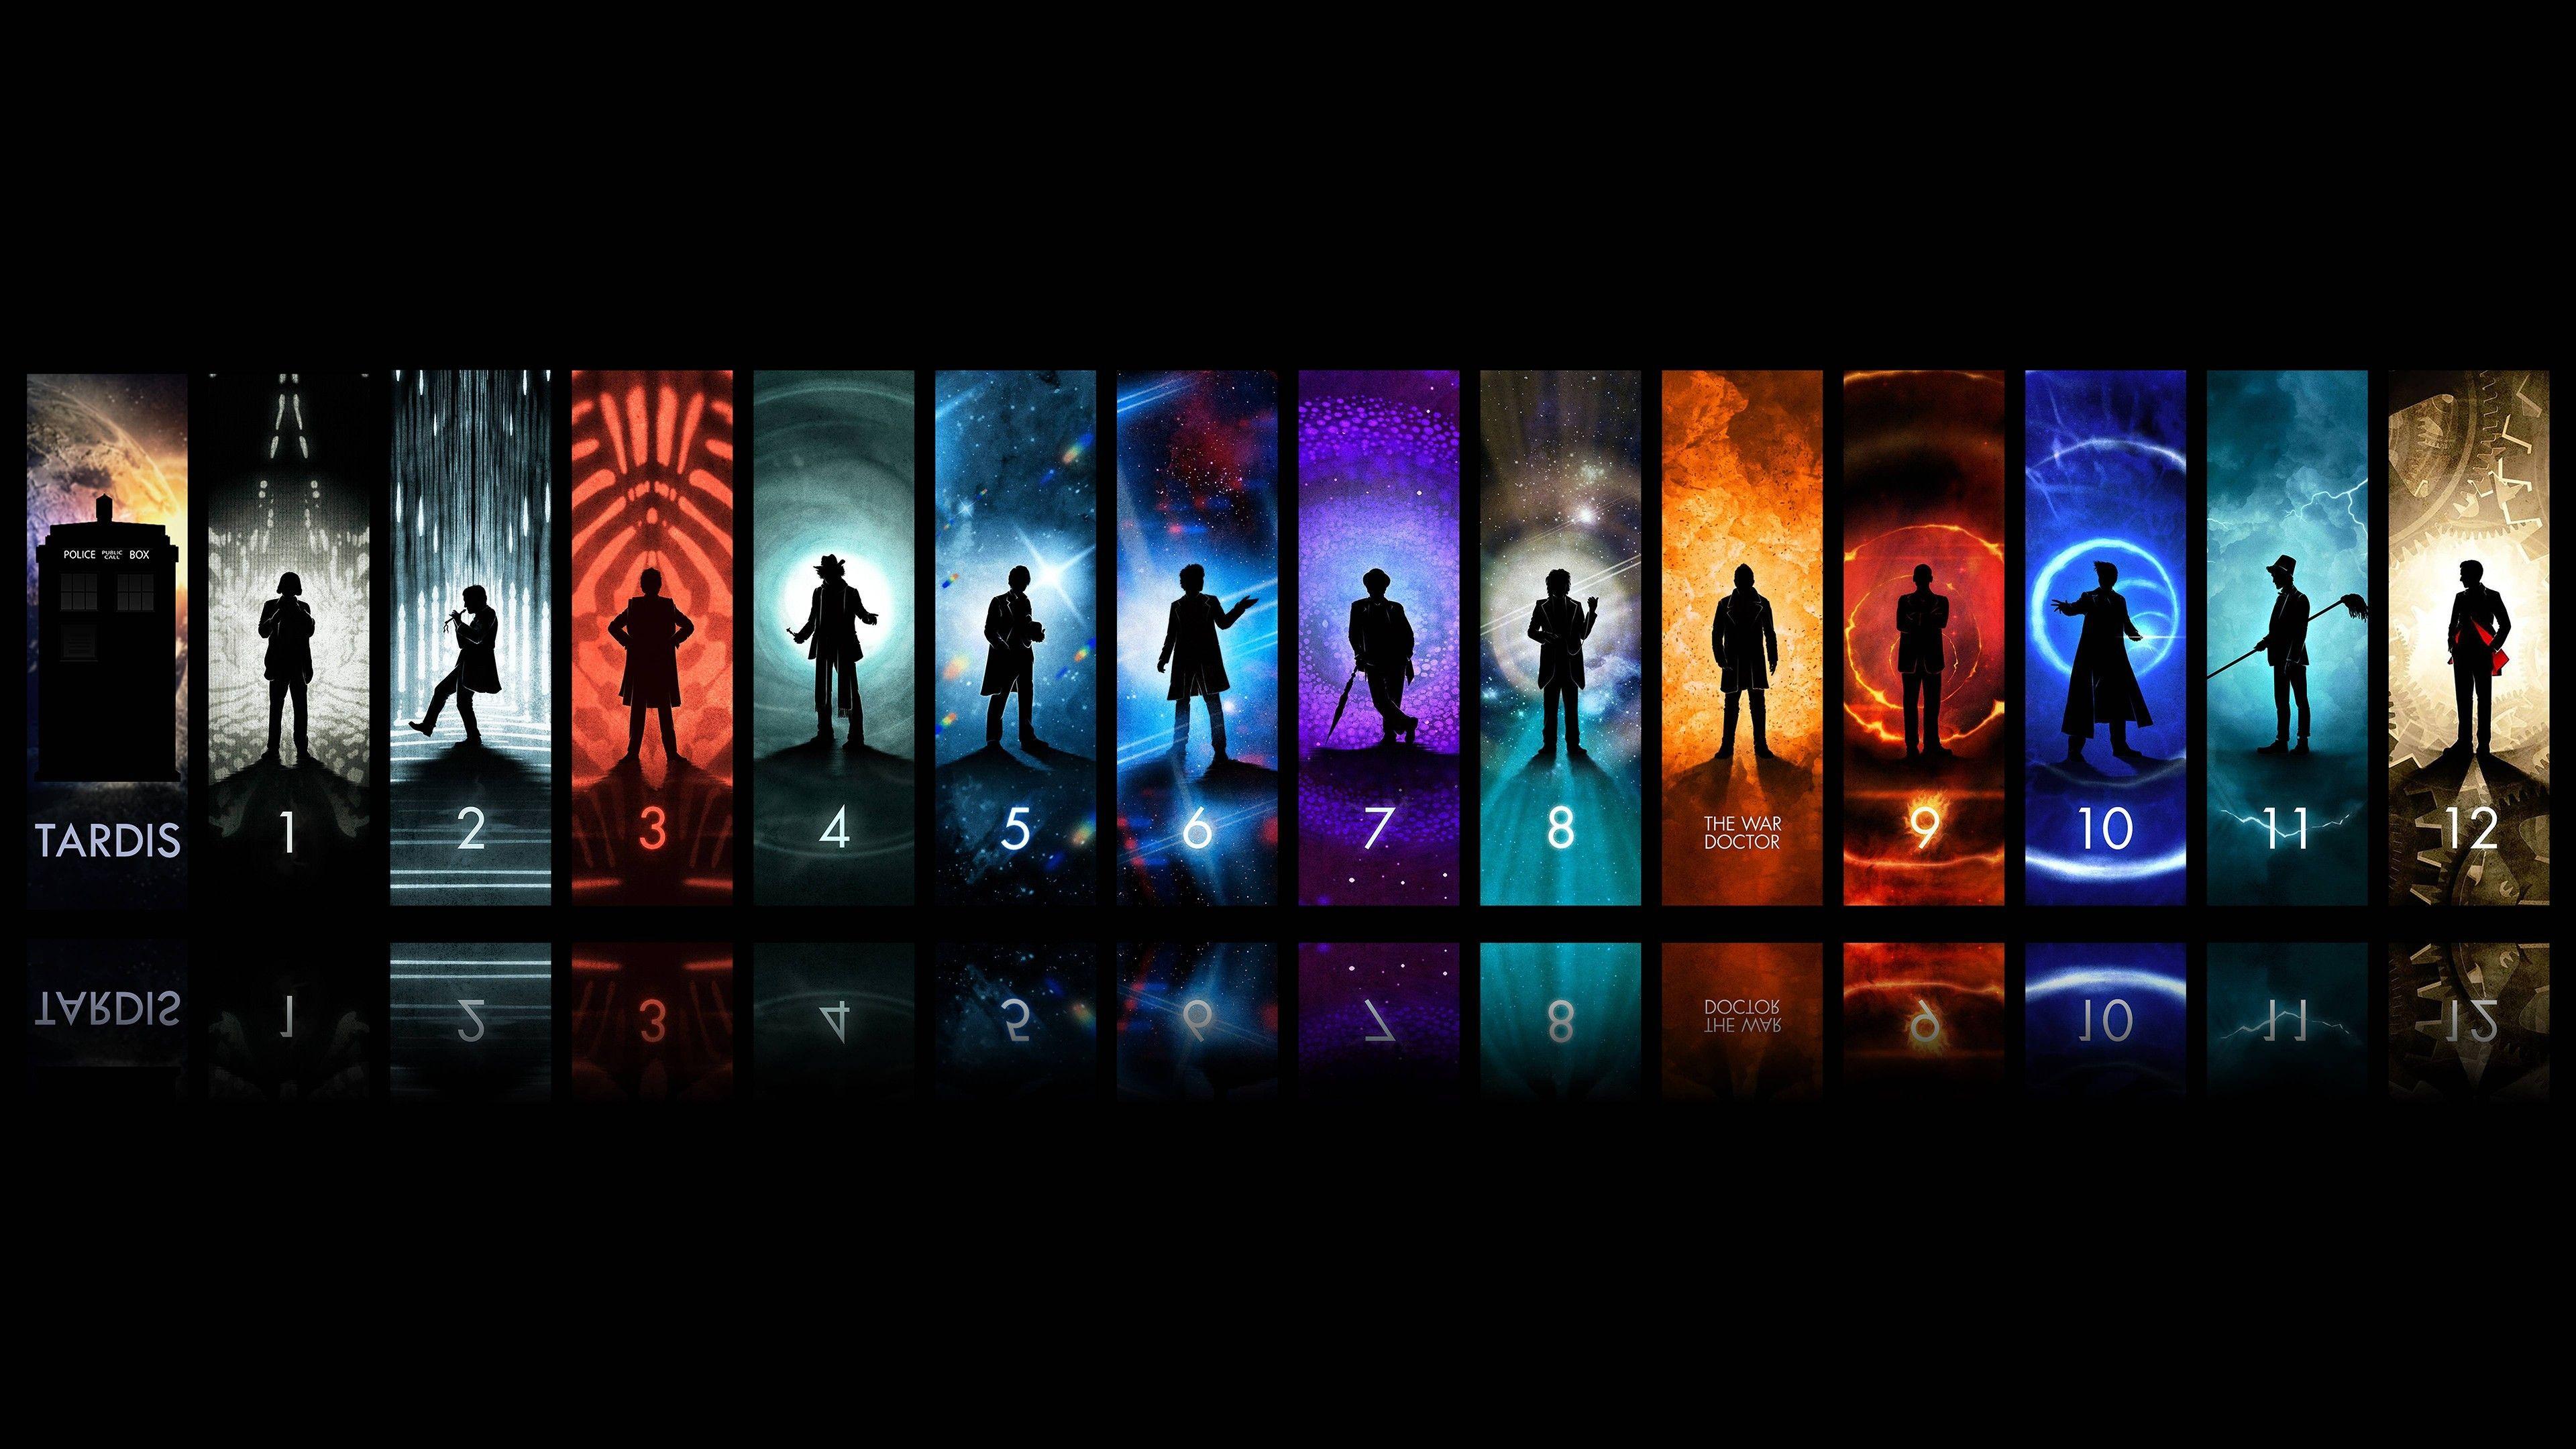 HD wallpaper Doctor Who The Doctor TARDIS Tenth Doctor Eleventh Doctor   Wallpaper Flare